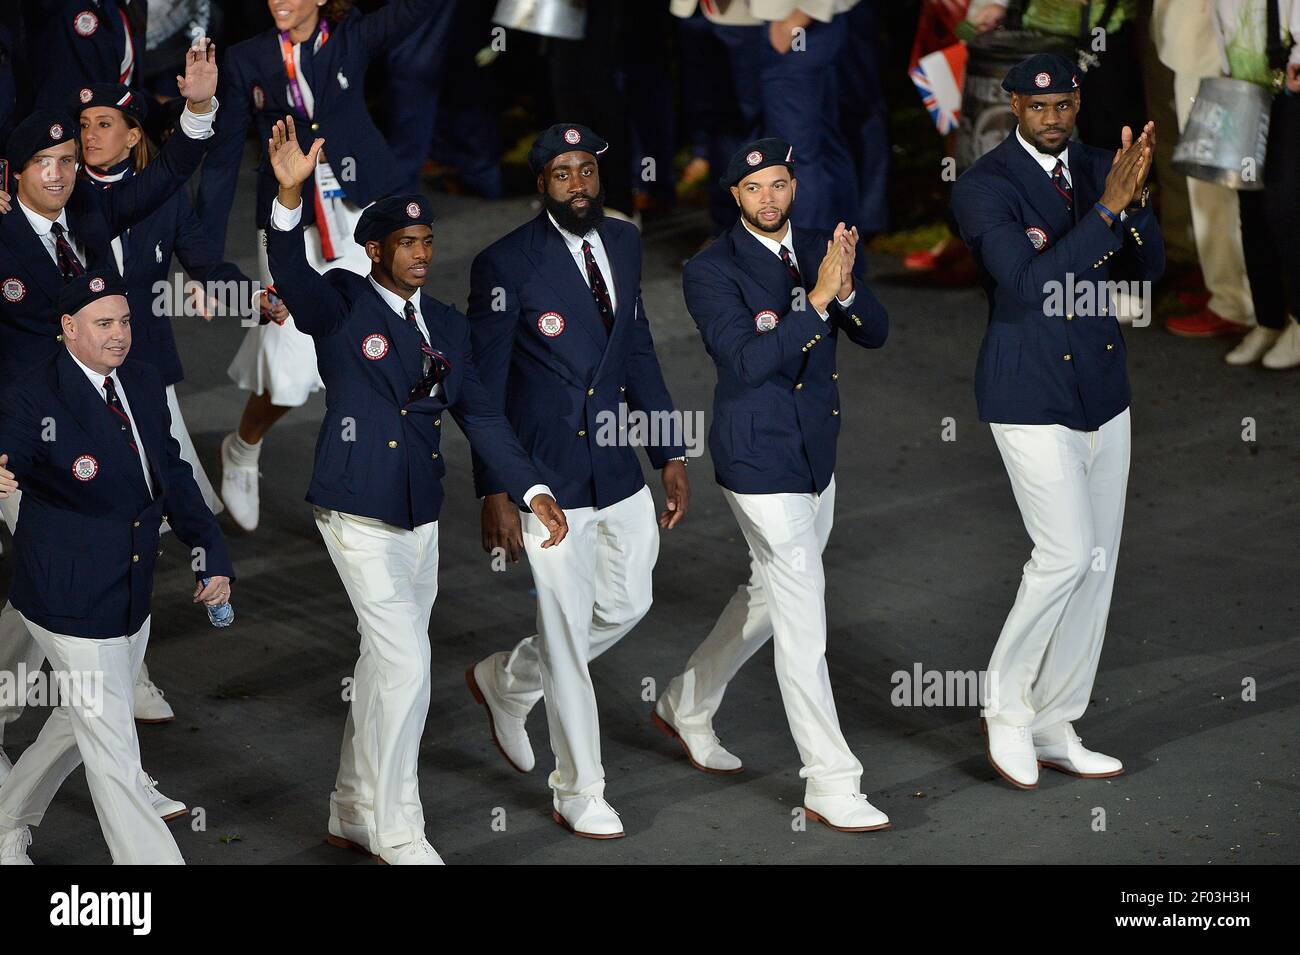 Members Of The Usa Men S Basketball Team And Nba Players Left To Right Chris Paul James Harden Deron Williams And Lebron James March Into The Olympic Stadium During The Opening Ceremony For